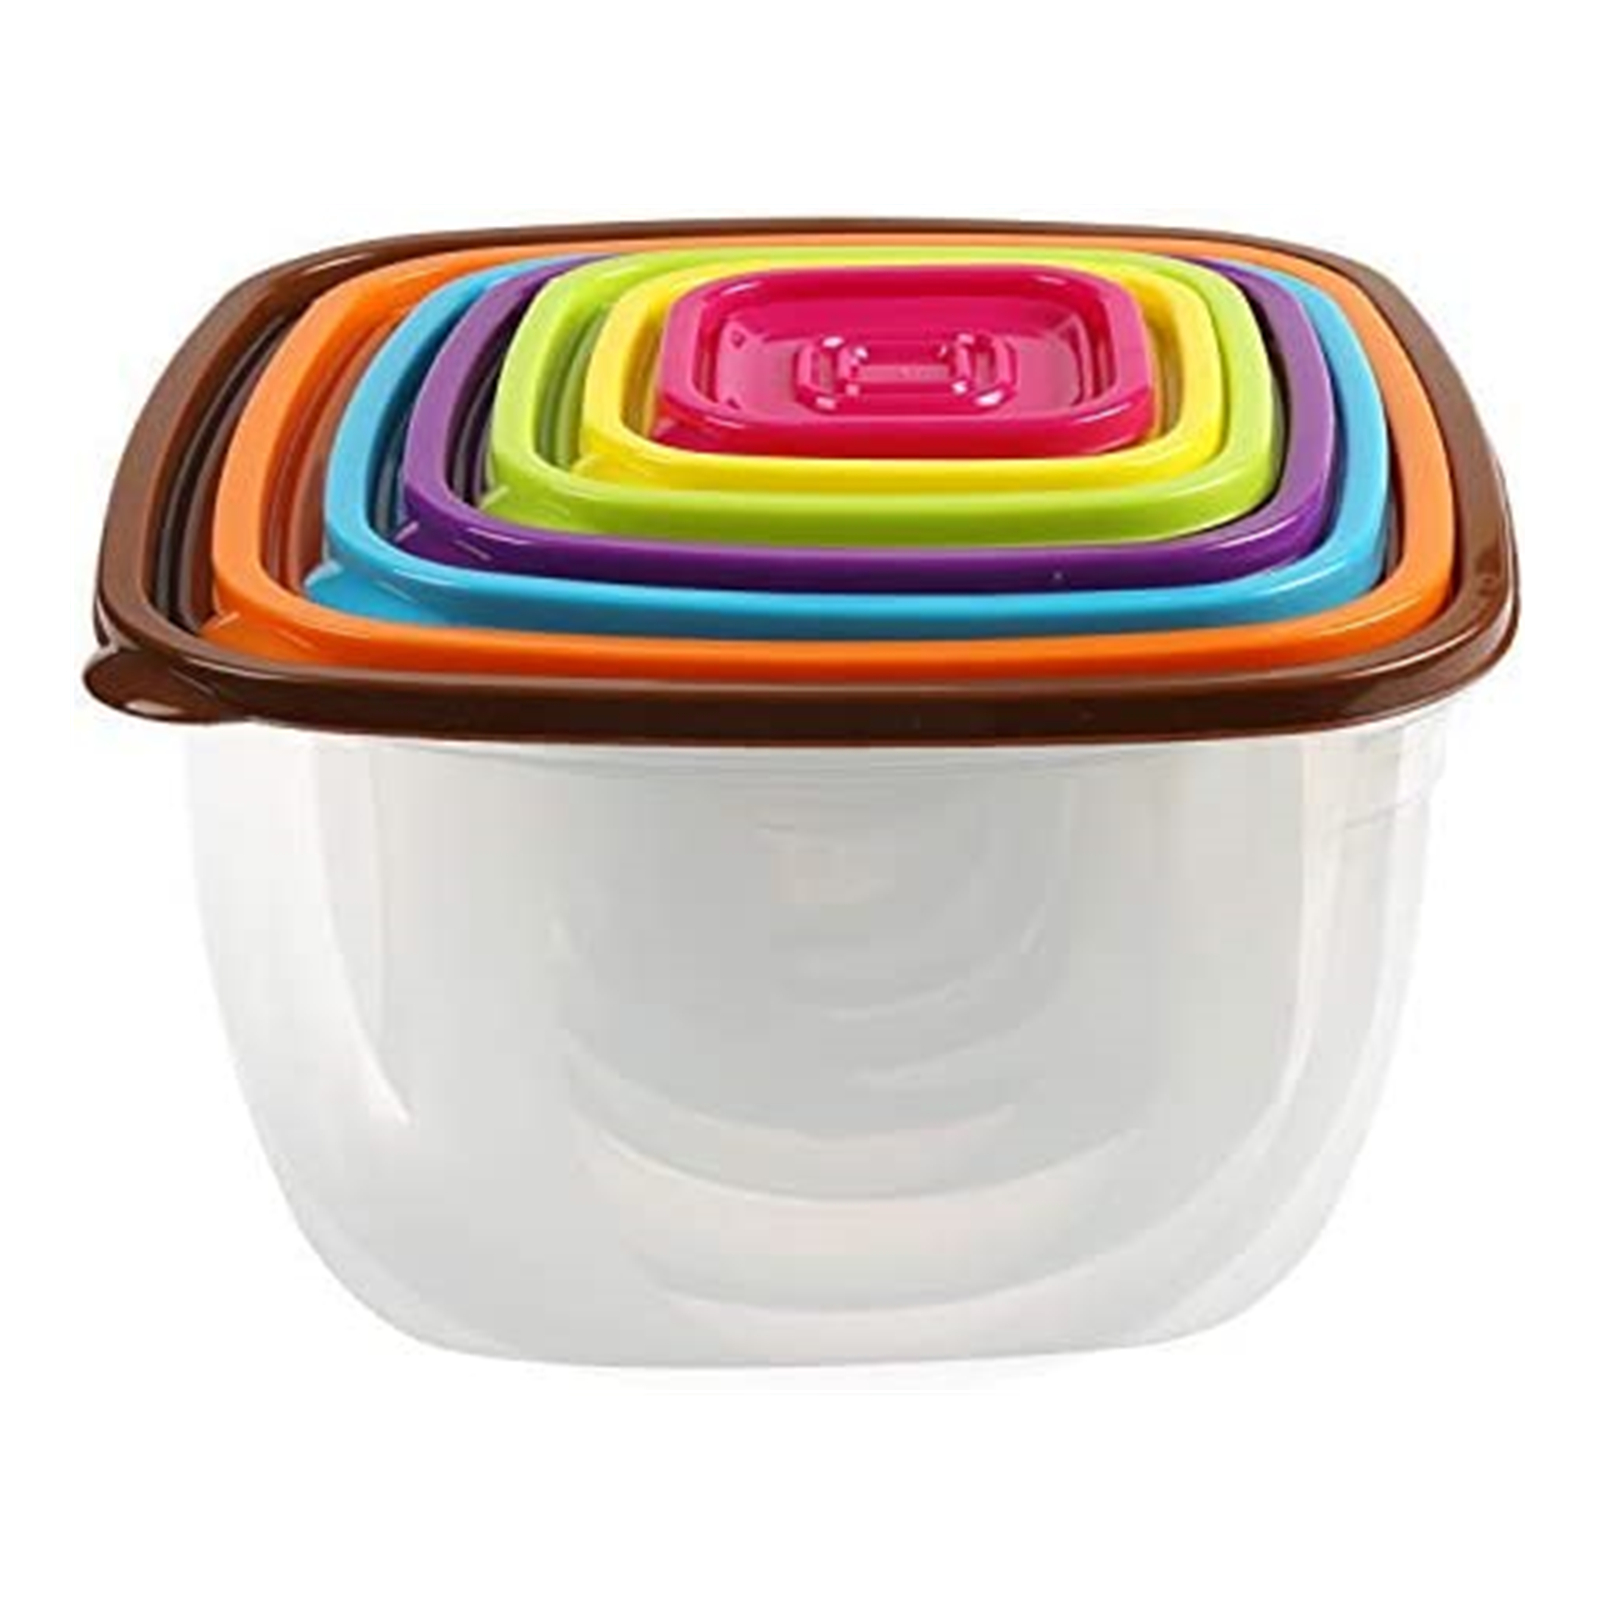 Shopwithgreen 7 Sets(14 Pieces) Multicolor Food Storage Containers - Square-shopwithgreen